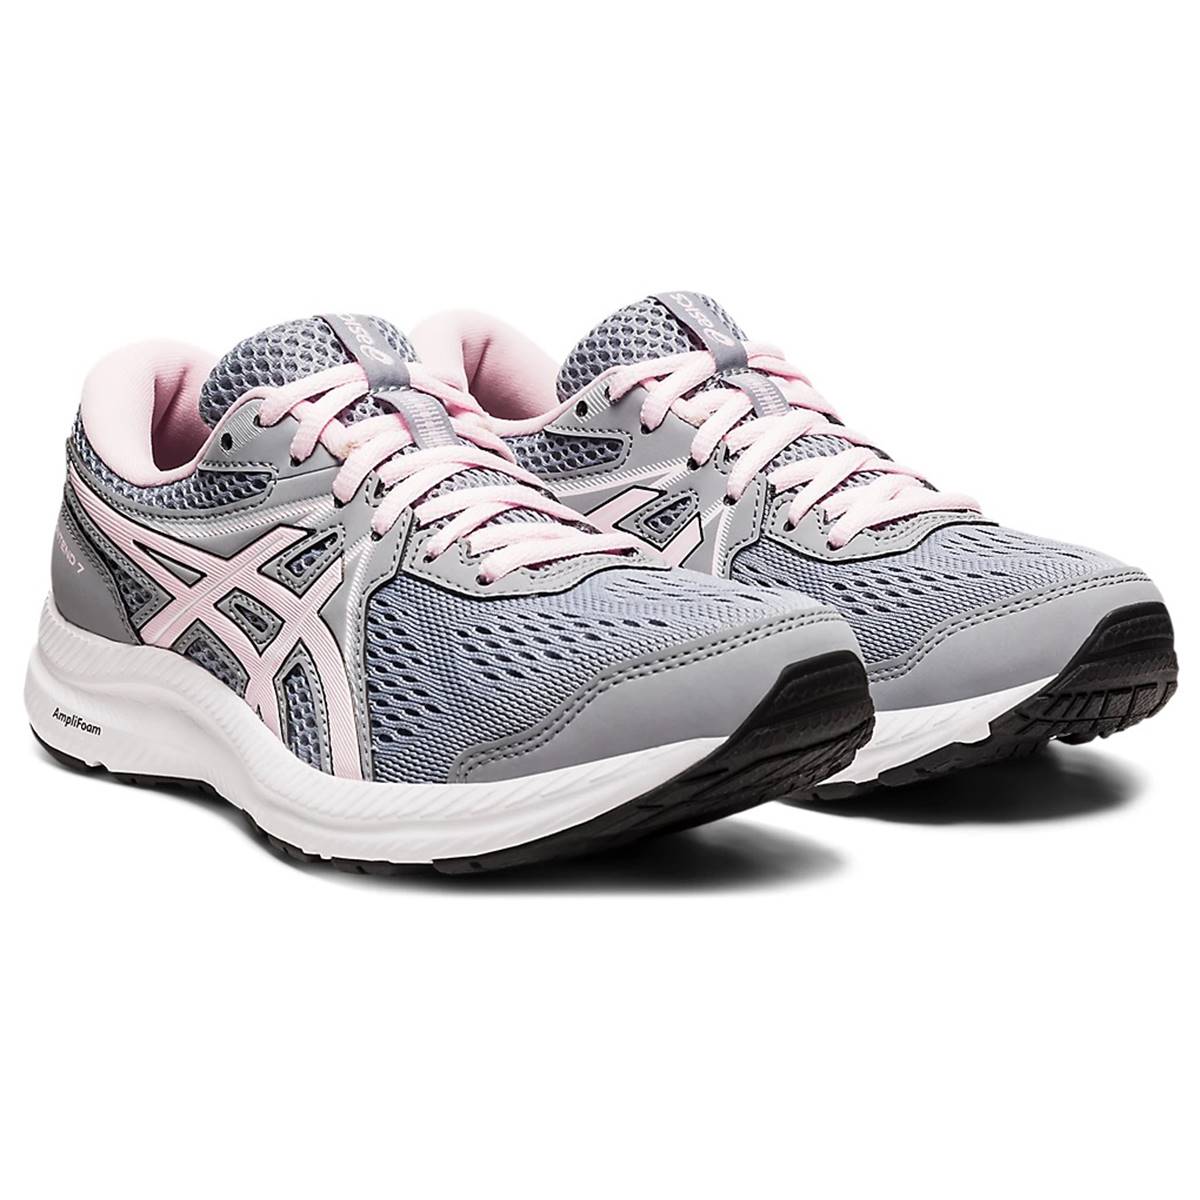 Womens Asics Gel-Contend 7 Athletic Sneakers